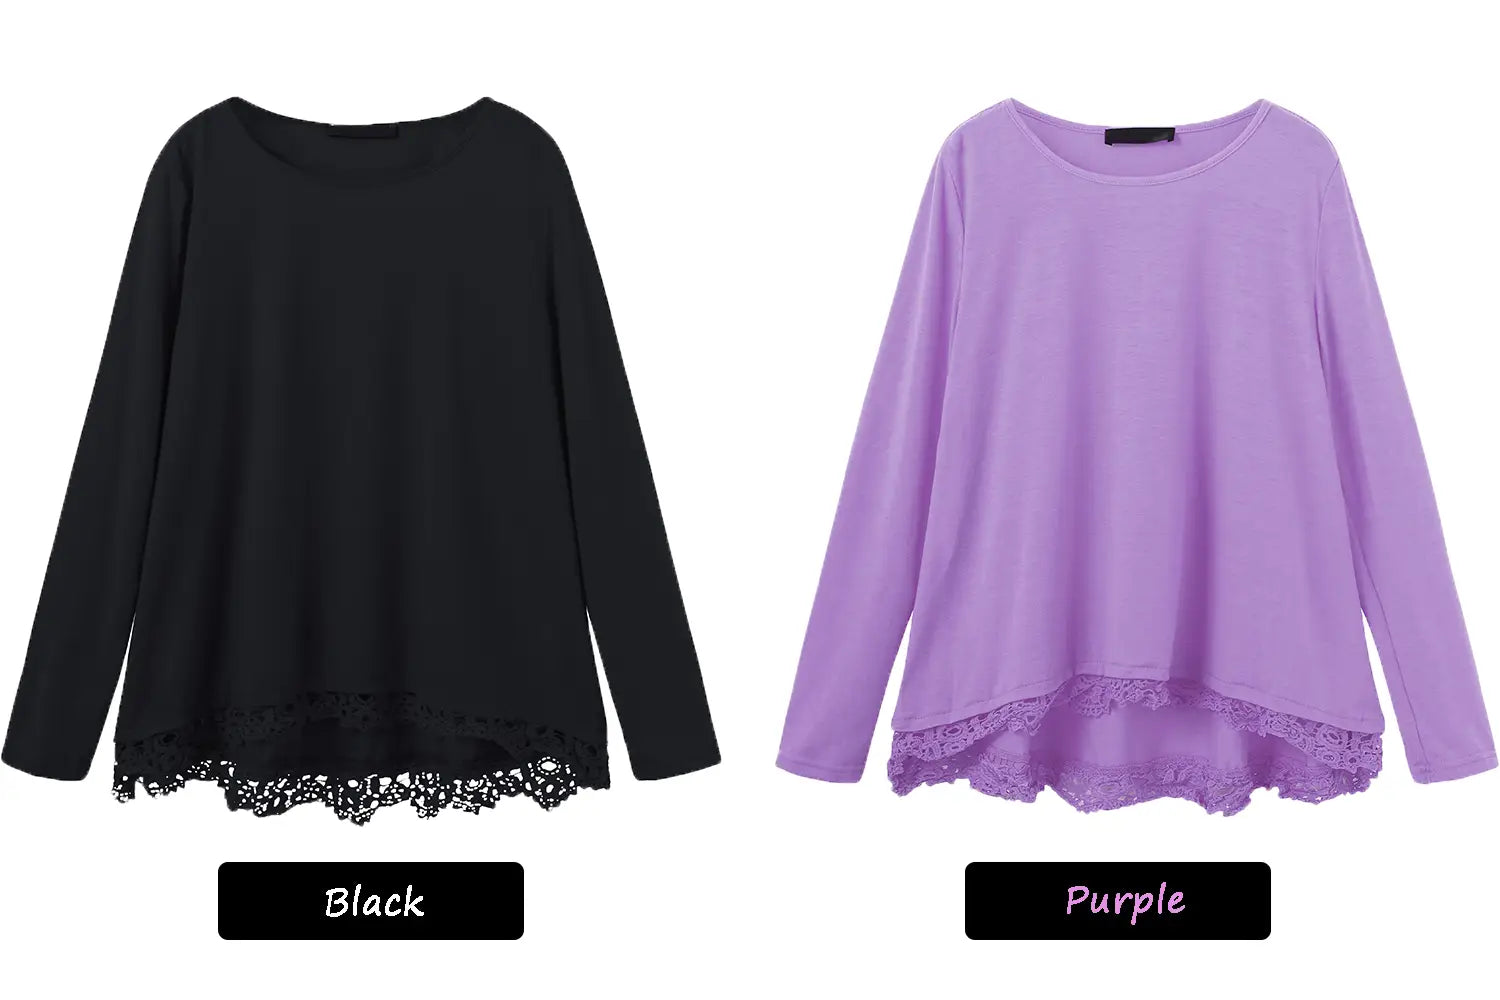 Lovemi - Women Lace Patchwork Solid Color T-Shirts Tops